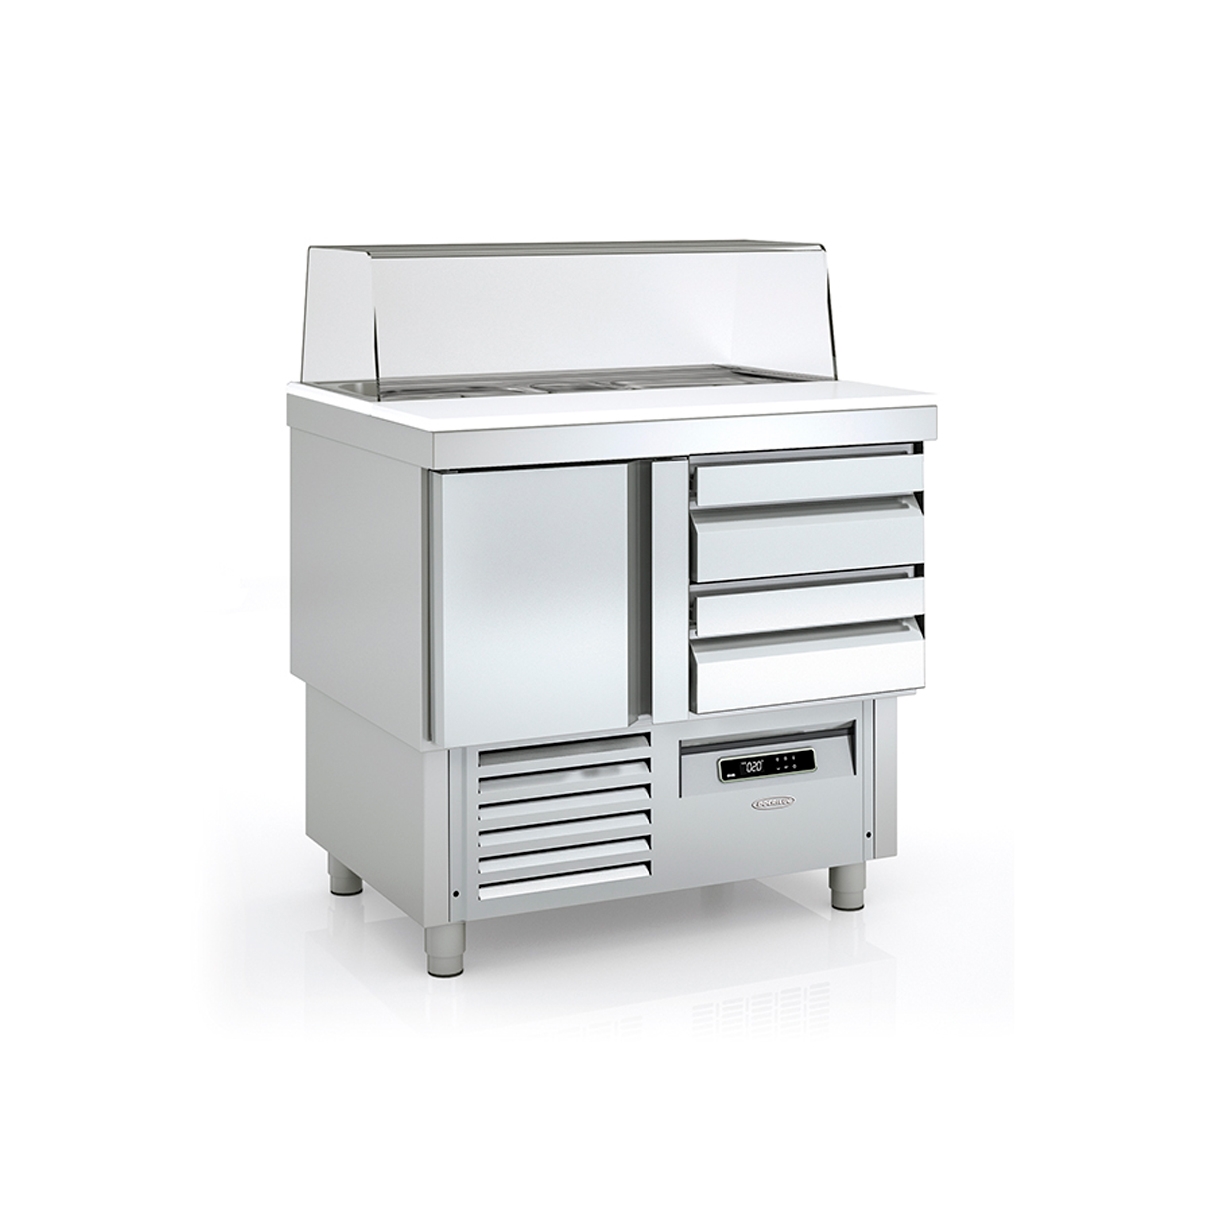 Gastronorm 1/1 Refrigerated Table for Food Preparation MS-C